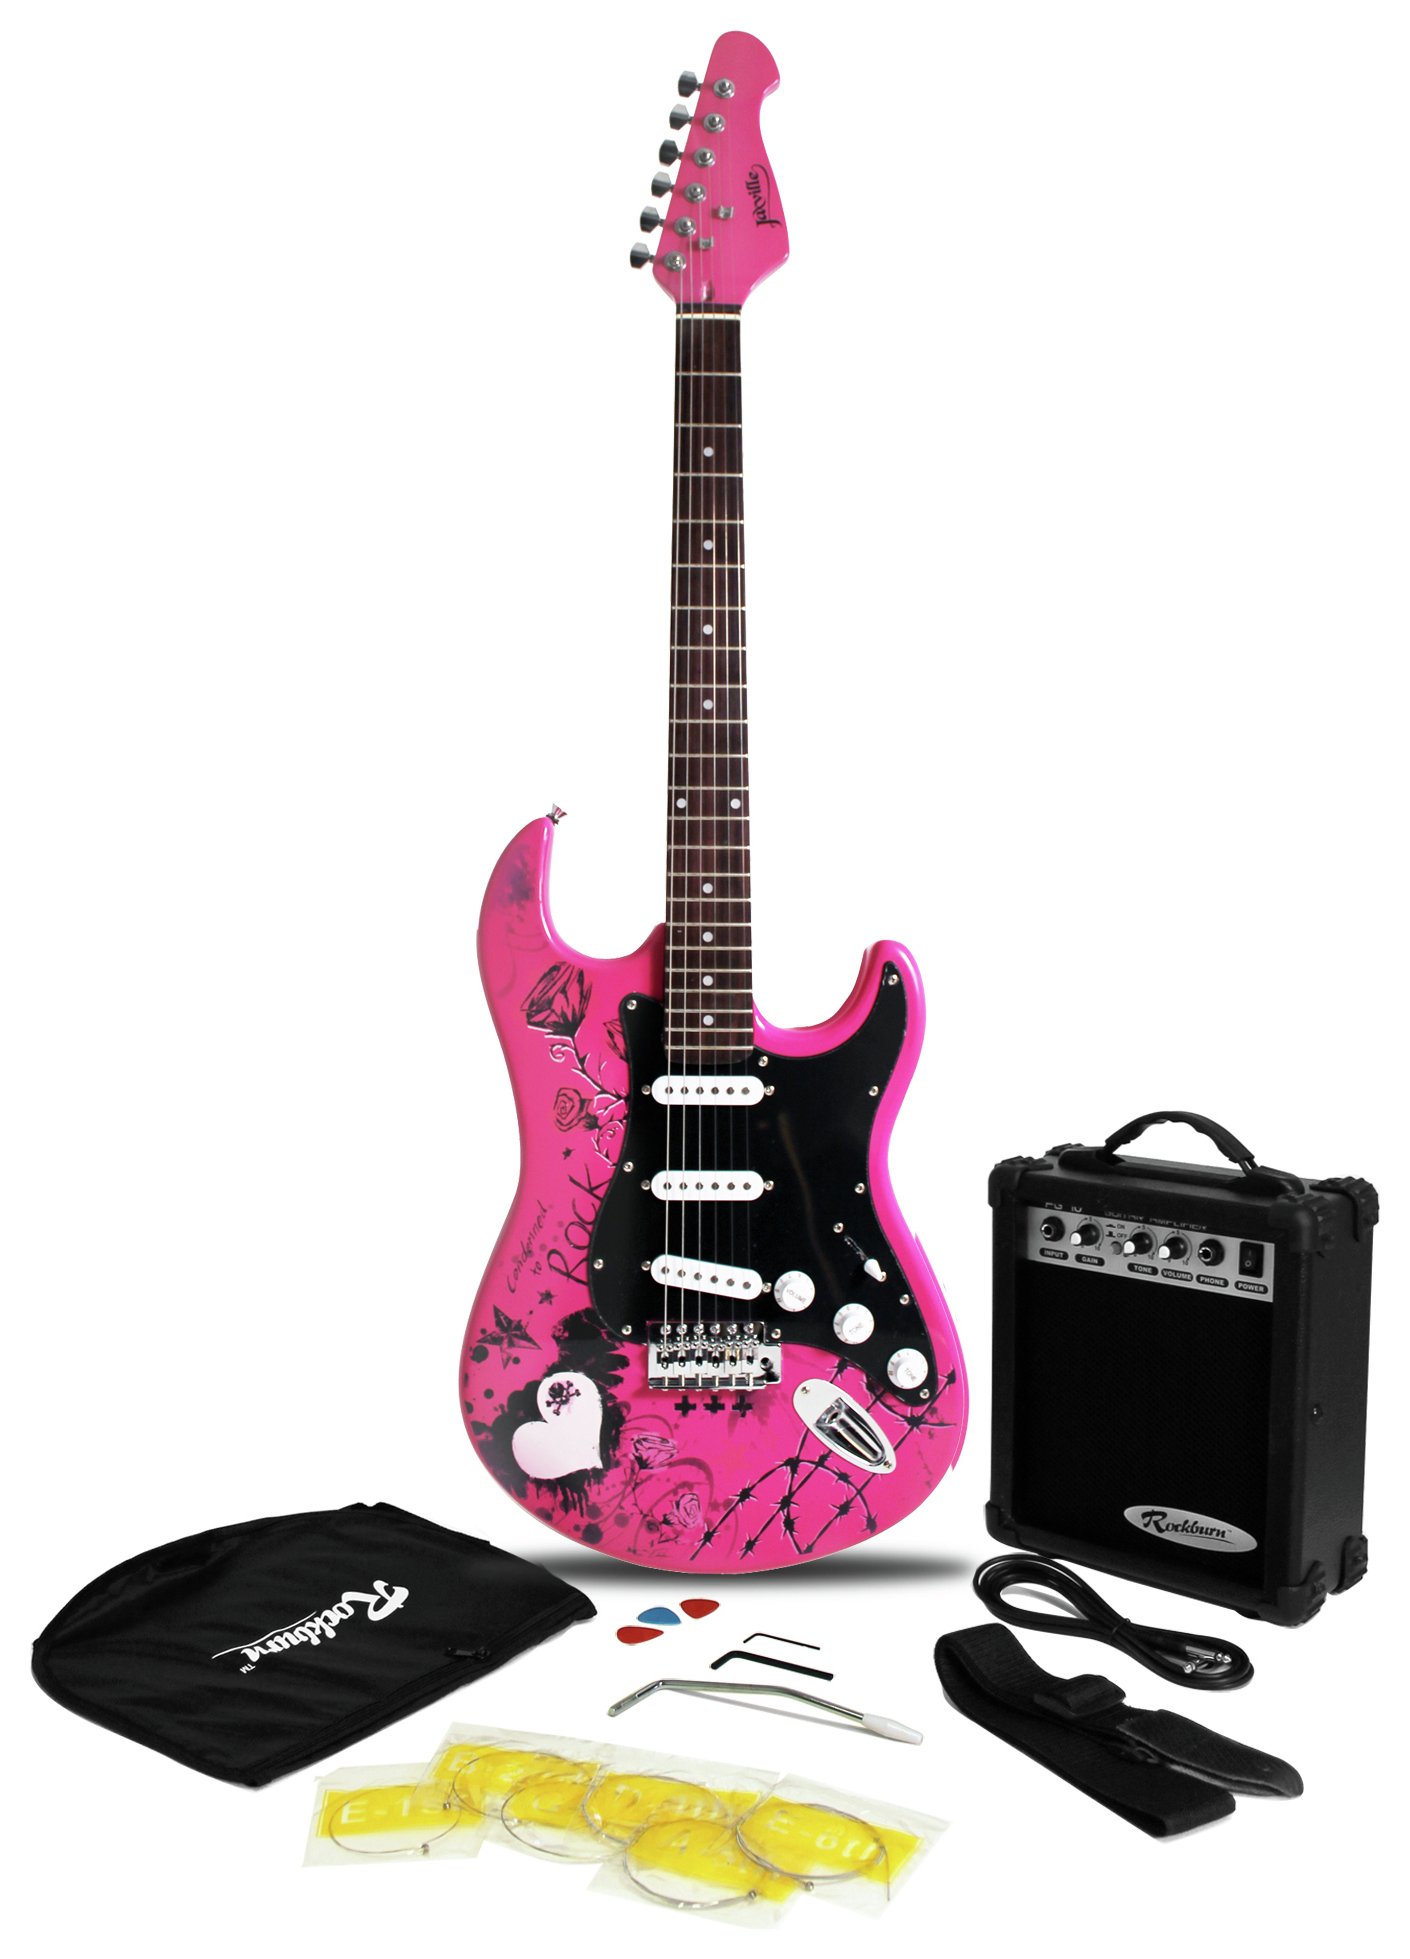 Jaxville Full Size Electric Guitar & Accessories review